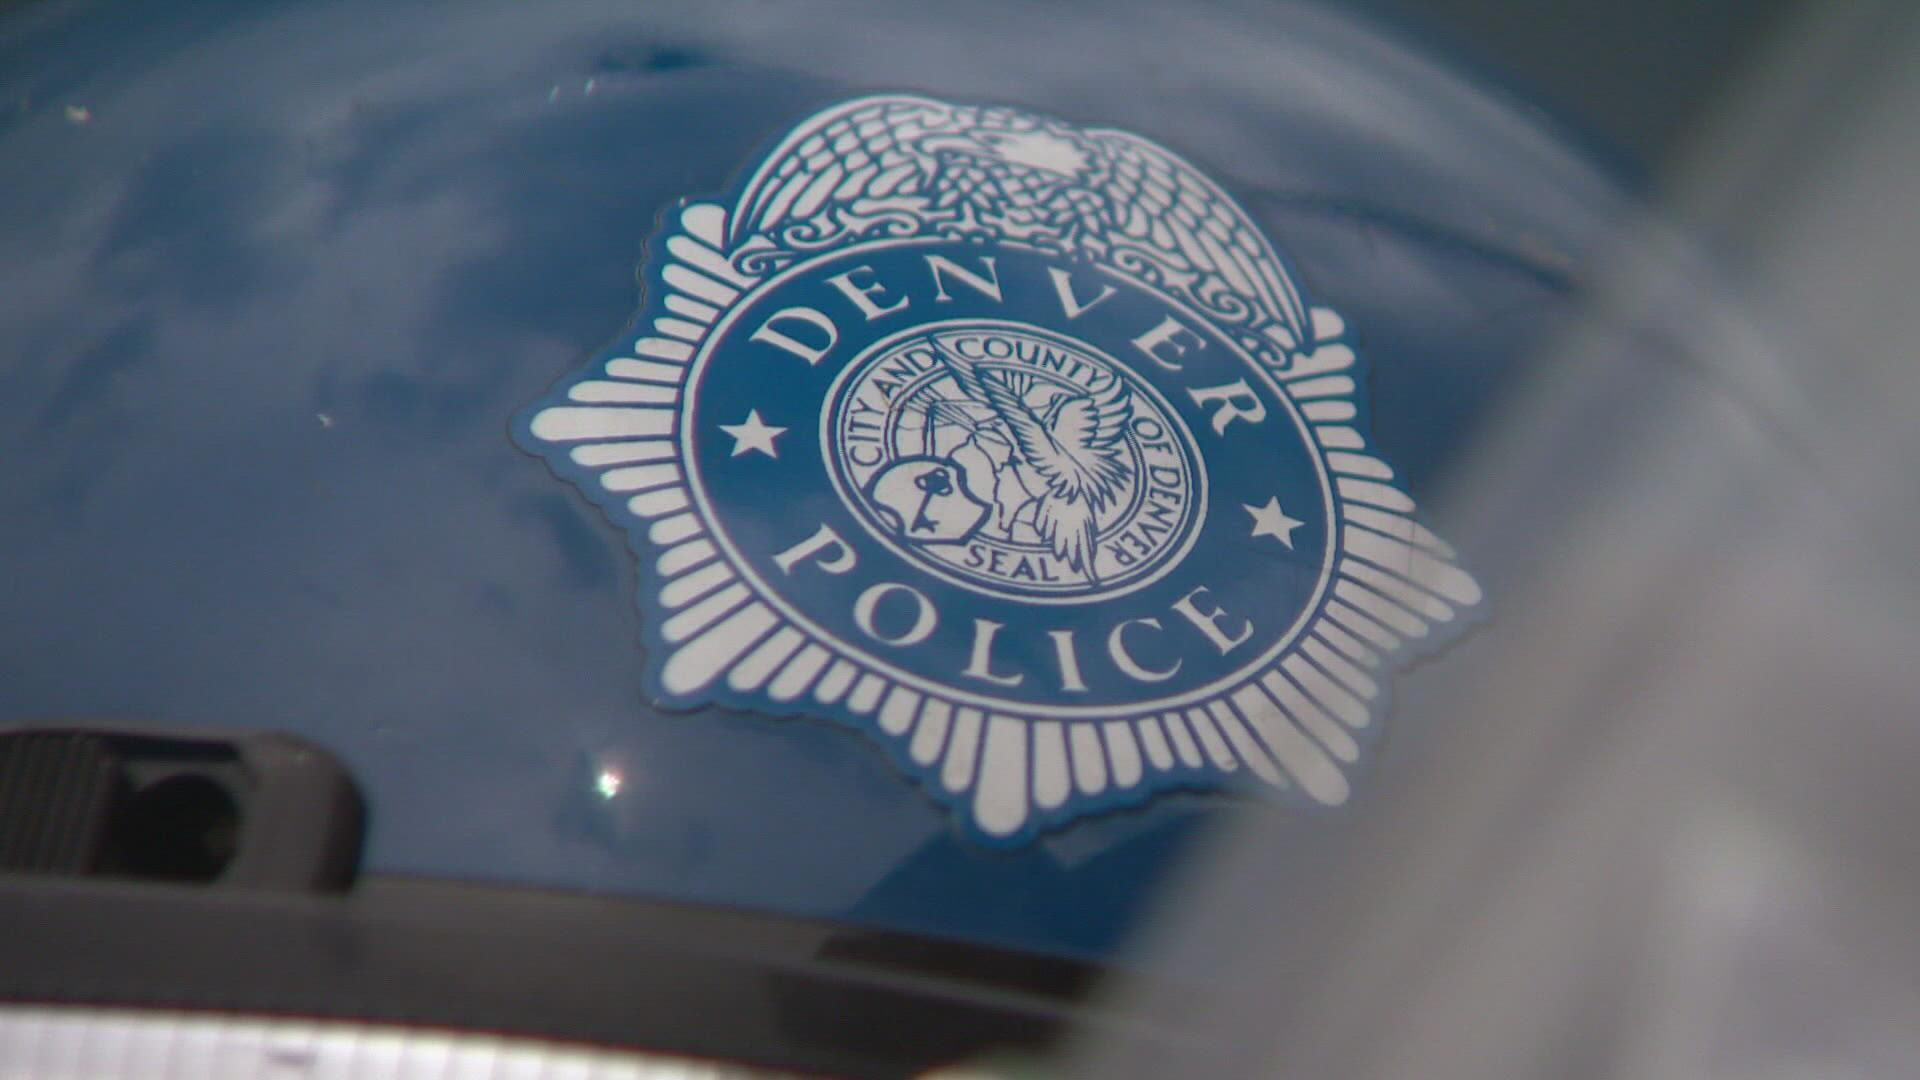 It's now a lot easier to get all kinds of information about the Denver Police Department.